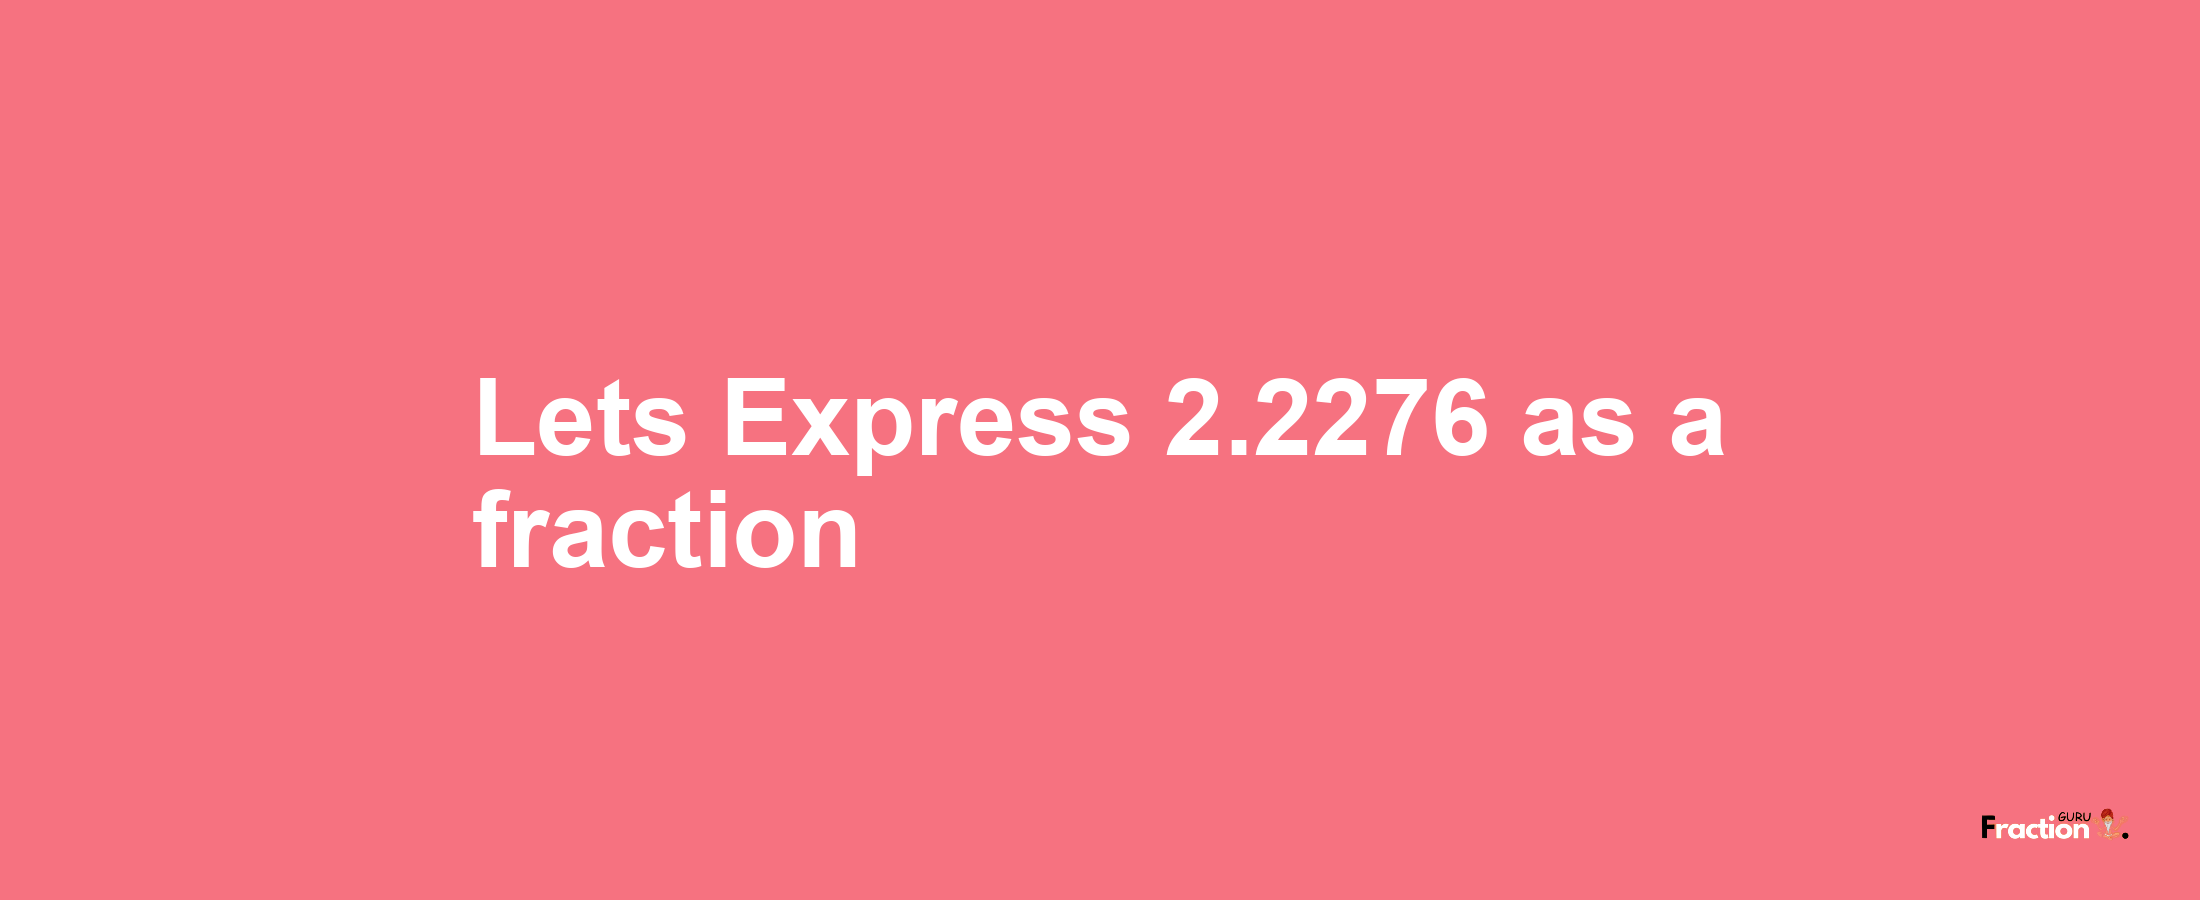 Lets Express 2.2276 as afraction